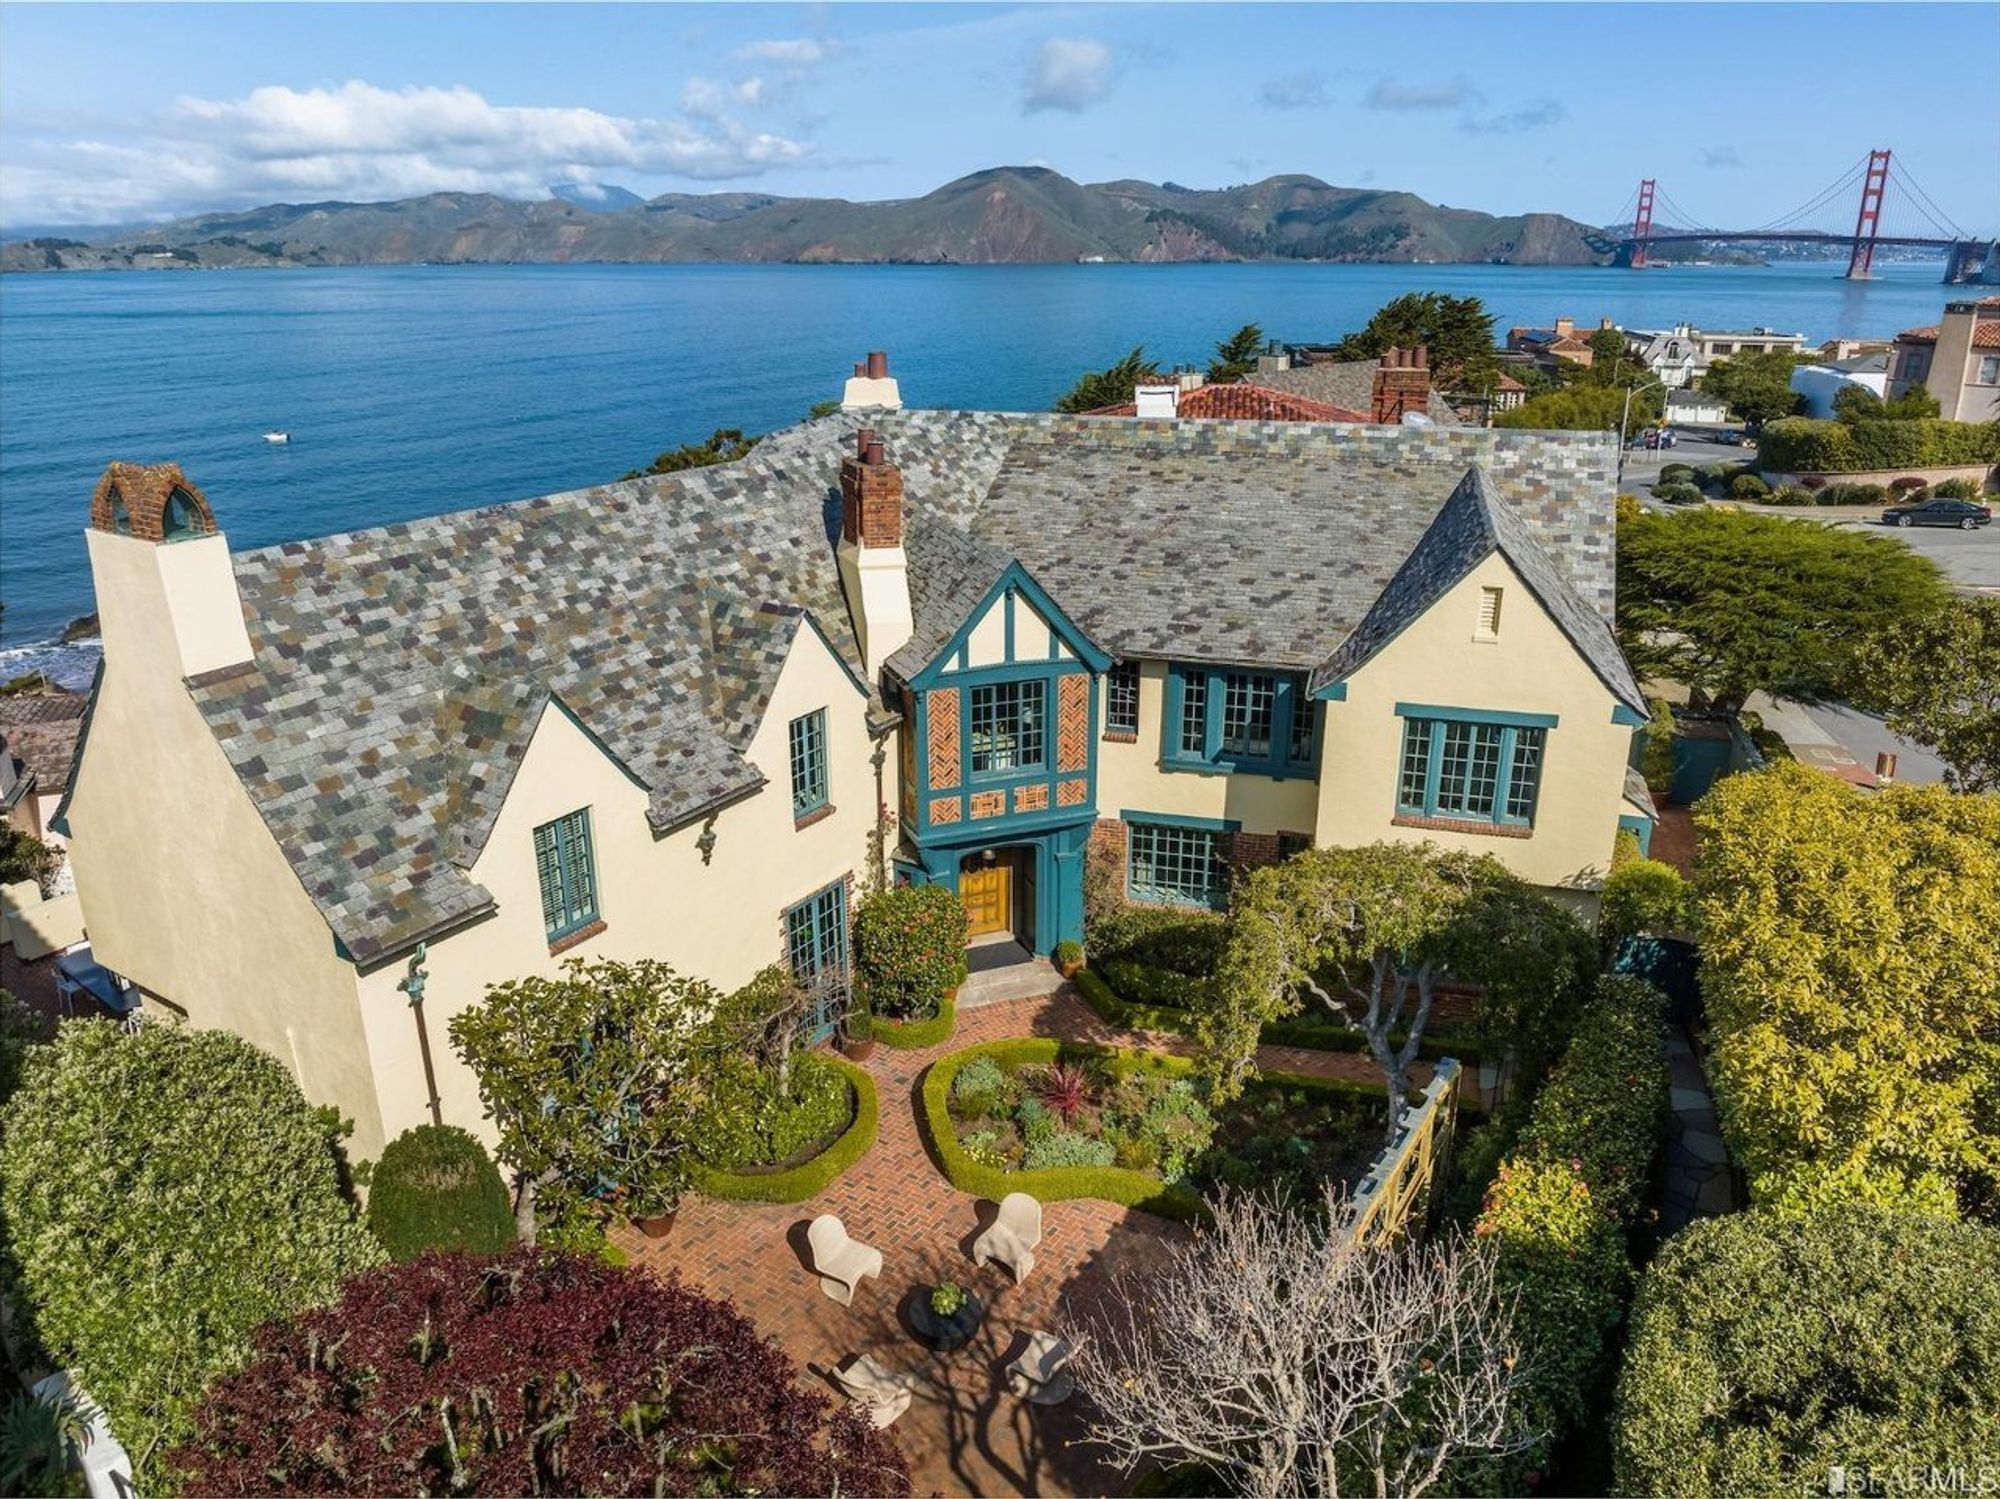 A storybook Sea Cliff Tudor with amenities to match the view asks $14.5 million